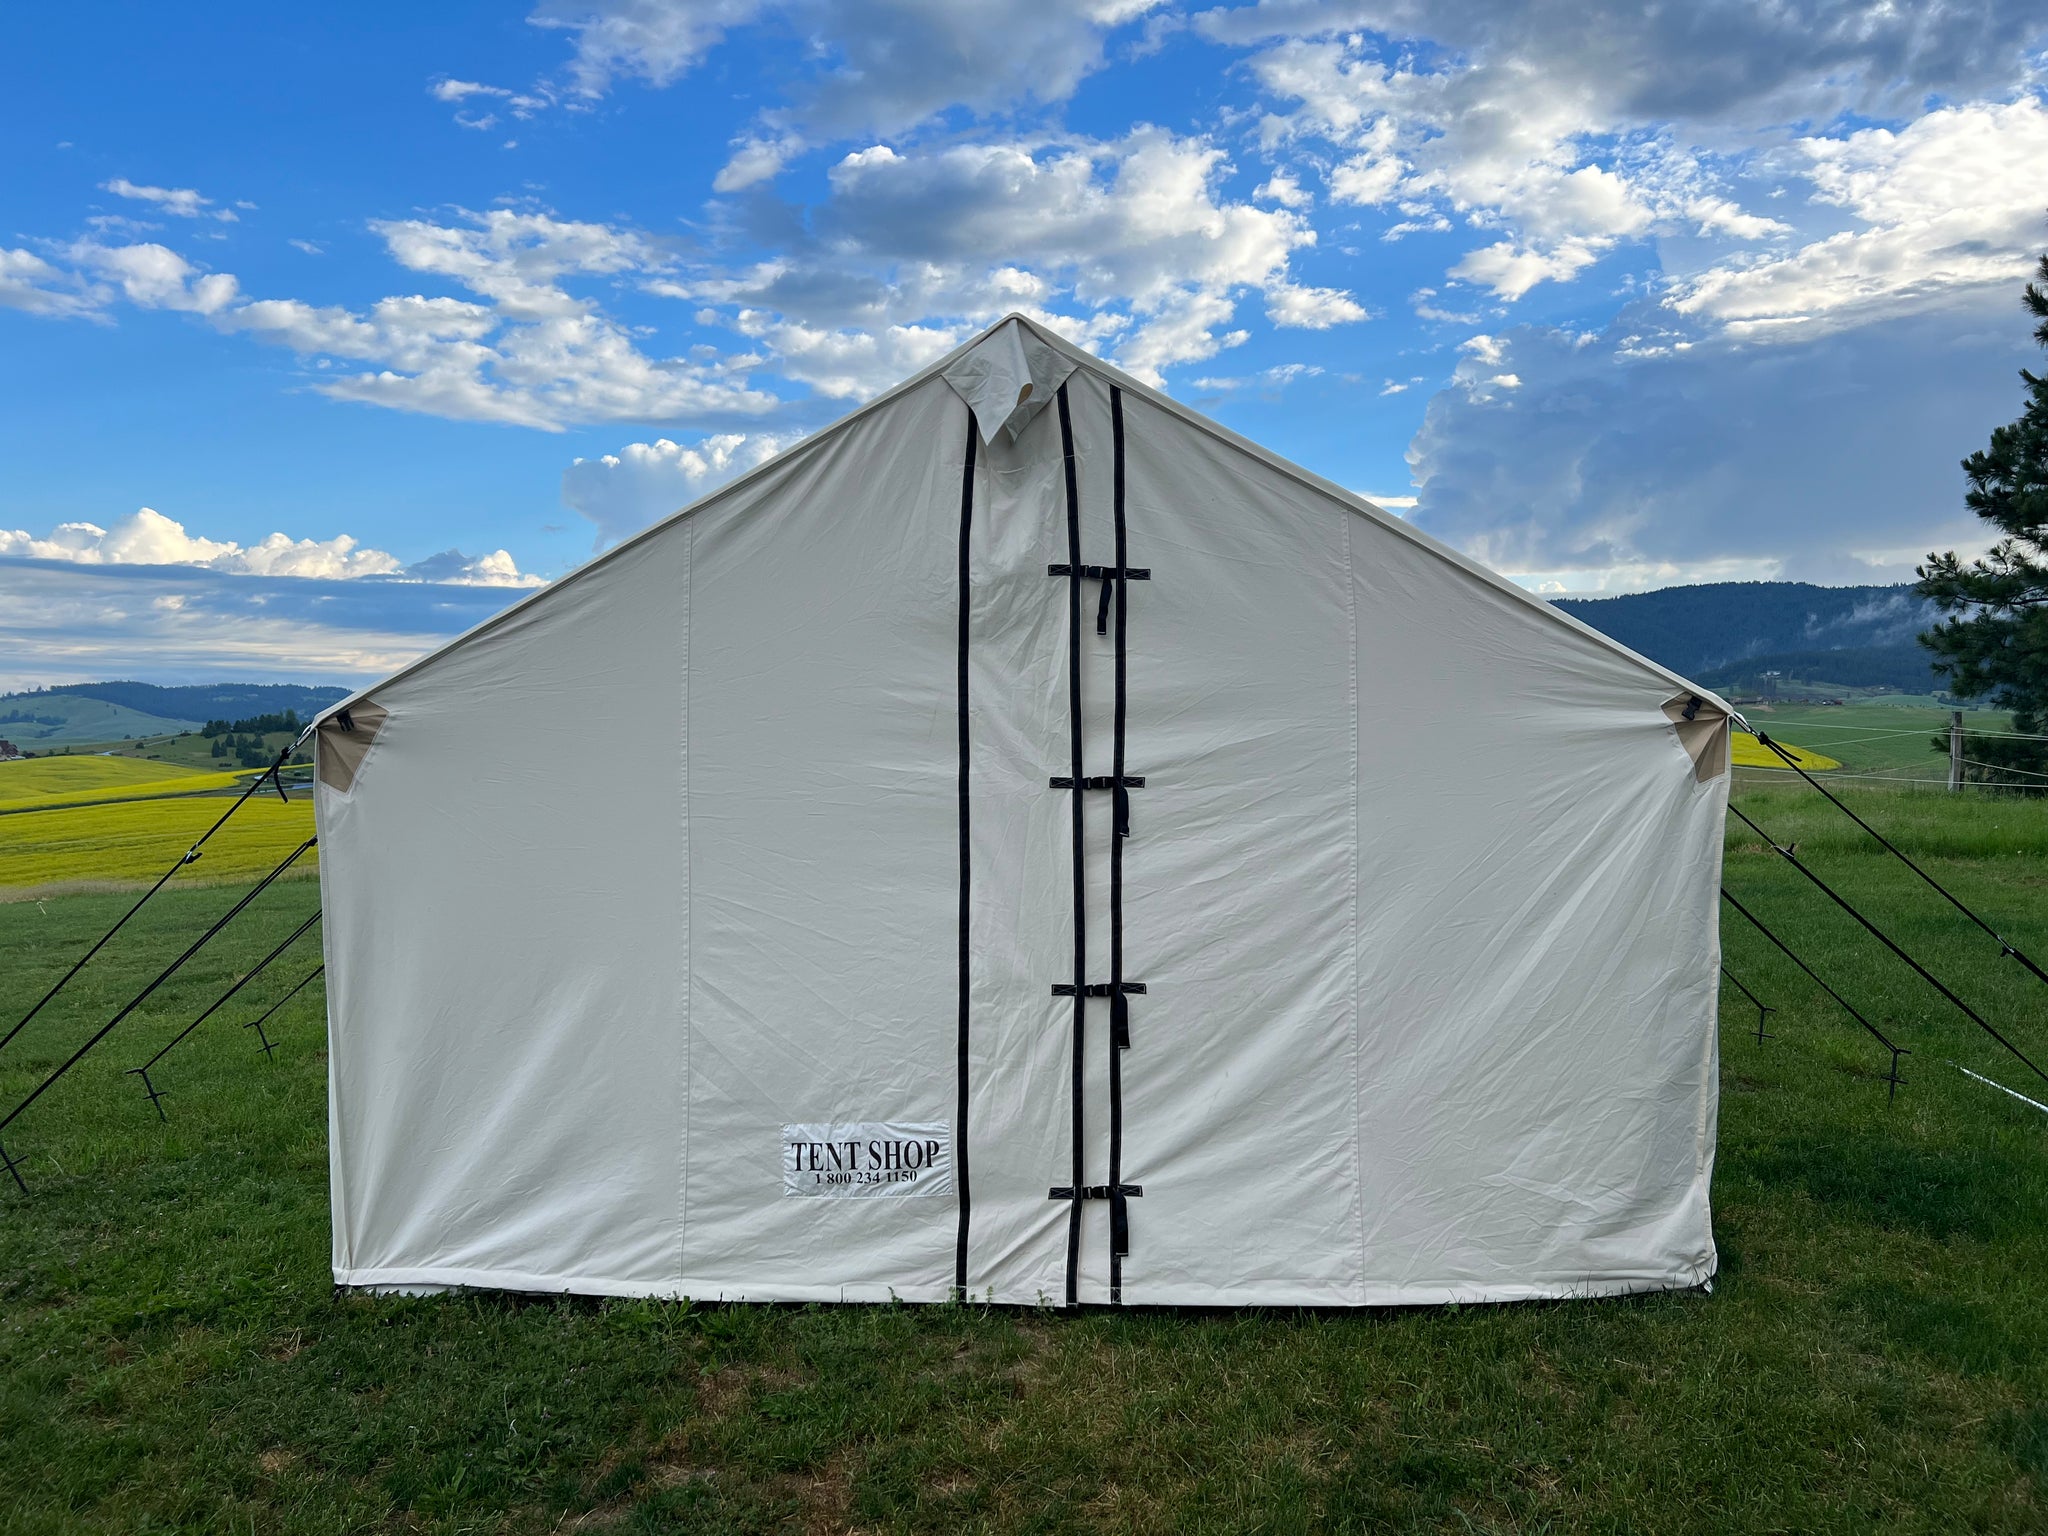 Elk Tent Package - Tent, Fly, Stove, & Complete Frame. STARTING PRICE $1575